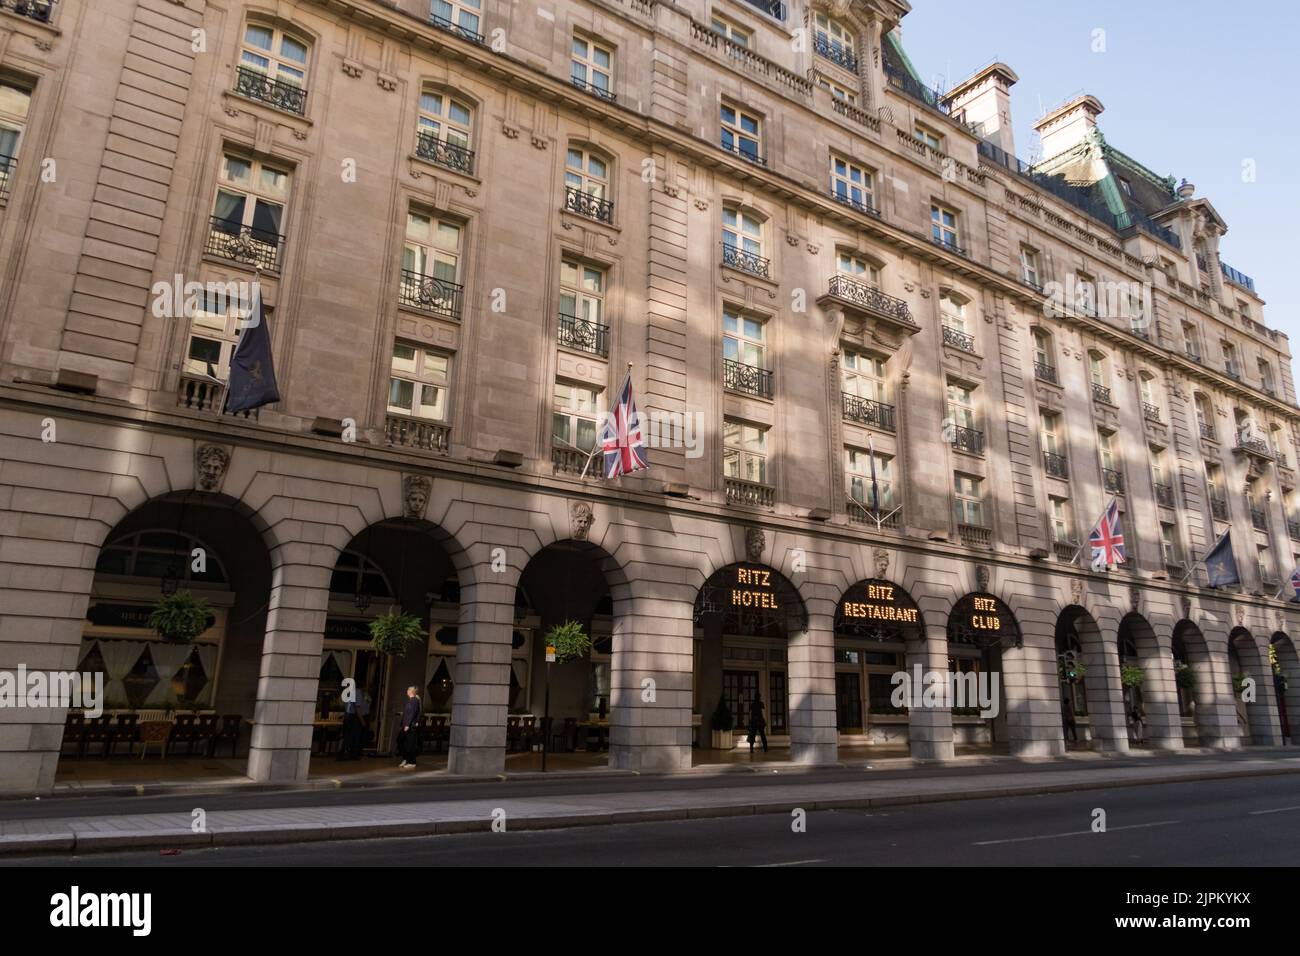 A view of the Ritz Hotel in London Stock Photo